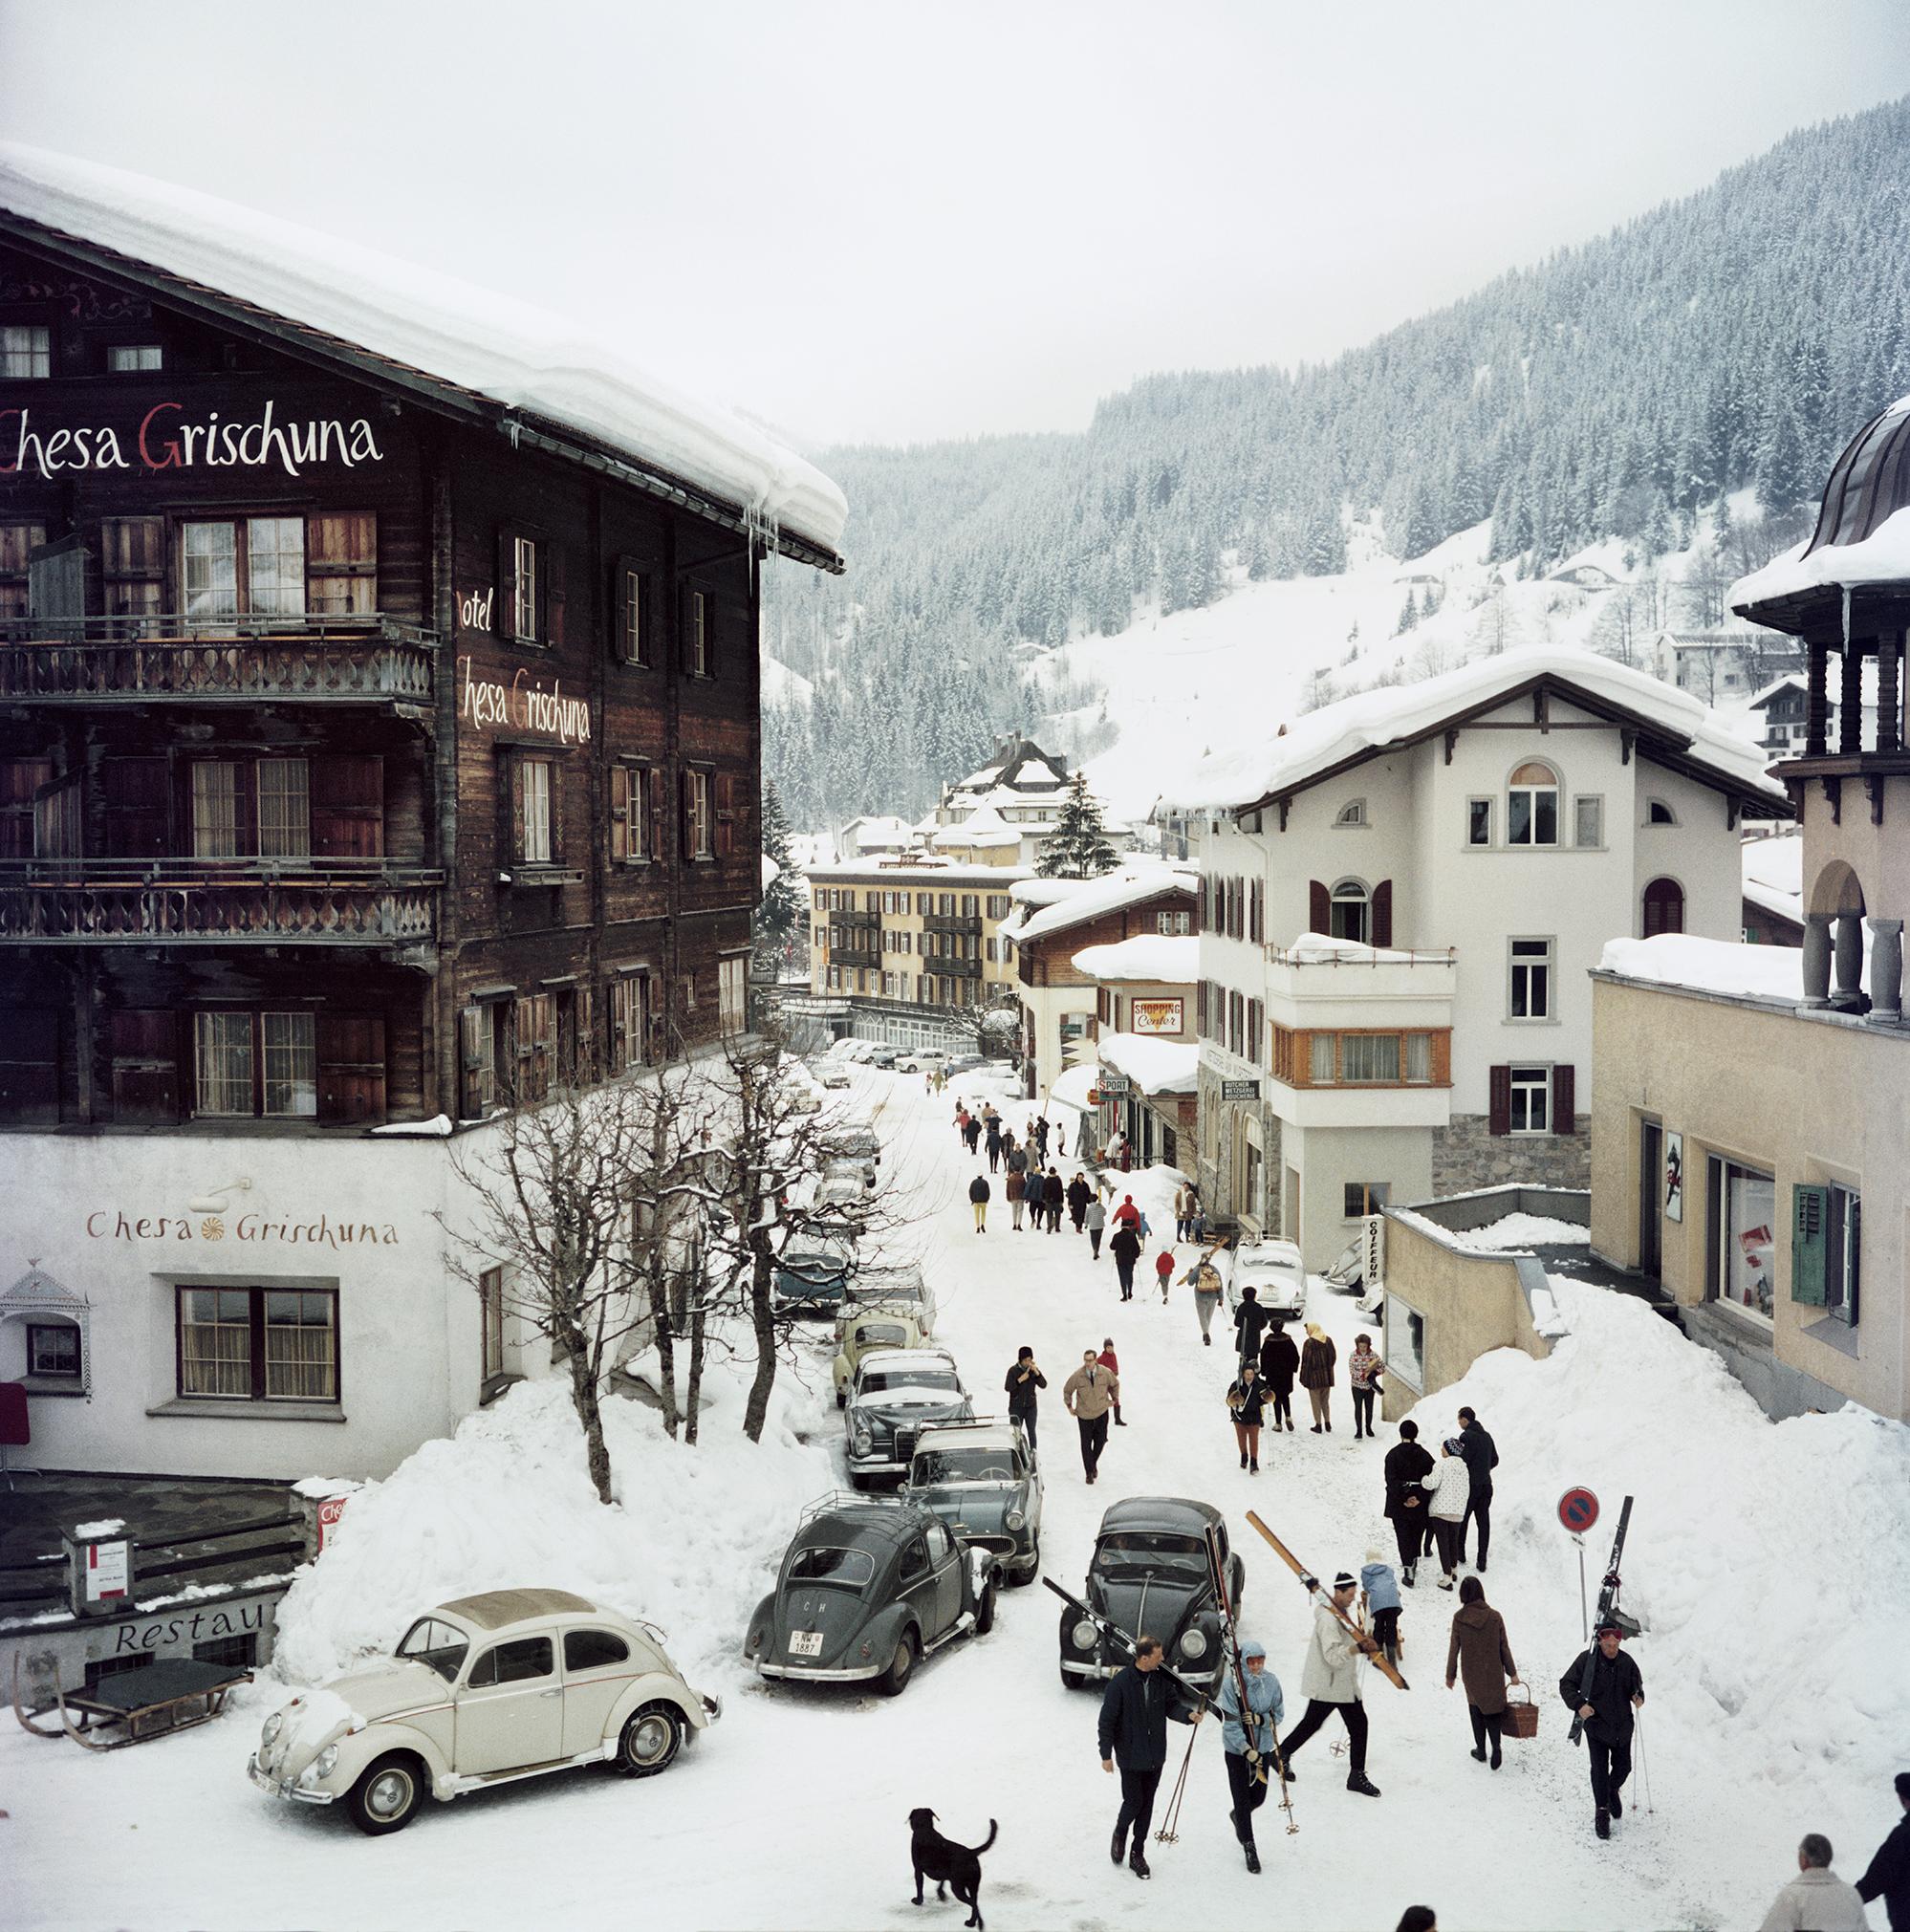 Slim Aarons
Kloisters
1963 (printed later)
C print
Estate stamped and numbered edition of 150 
with Certificate of authenticity

Caption: Skiers pass by the Hotel Chesa Grischuna in Klosters, 1963. (Photo by Slim Aarons/Hulton Archive/Getty